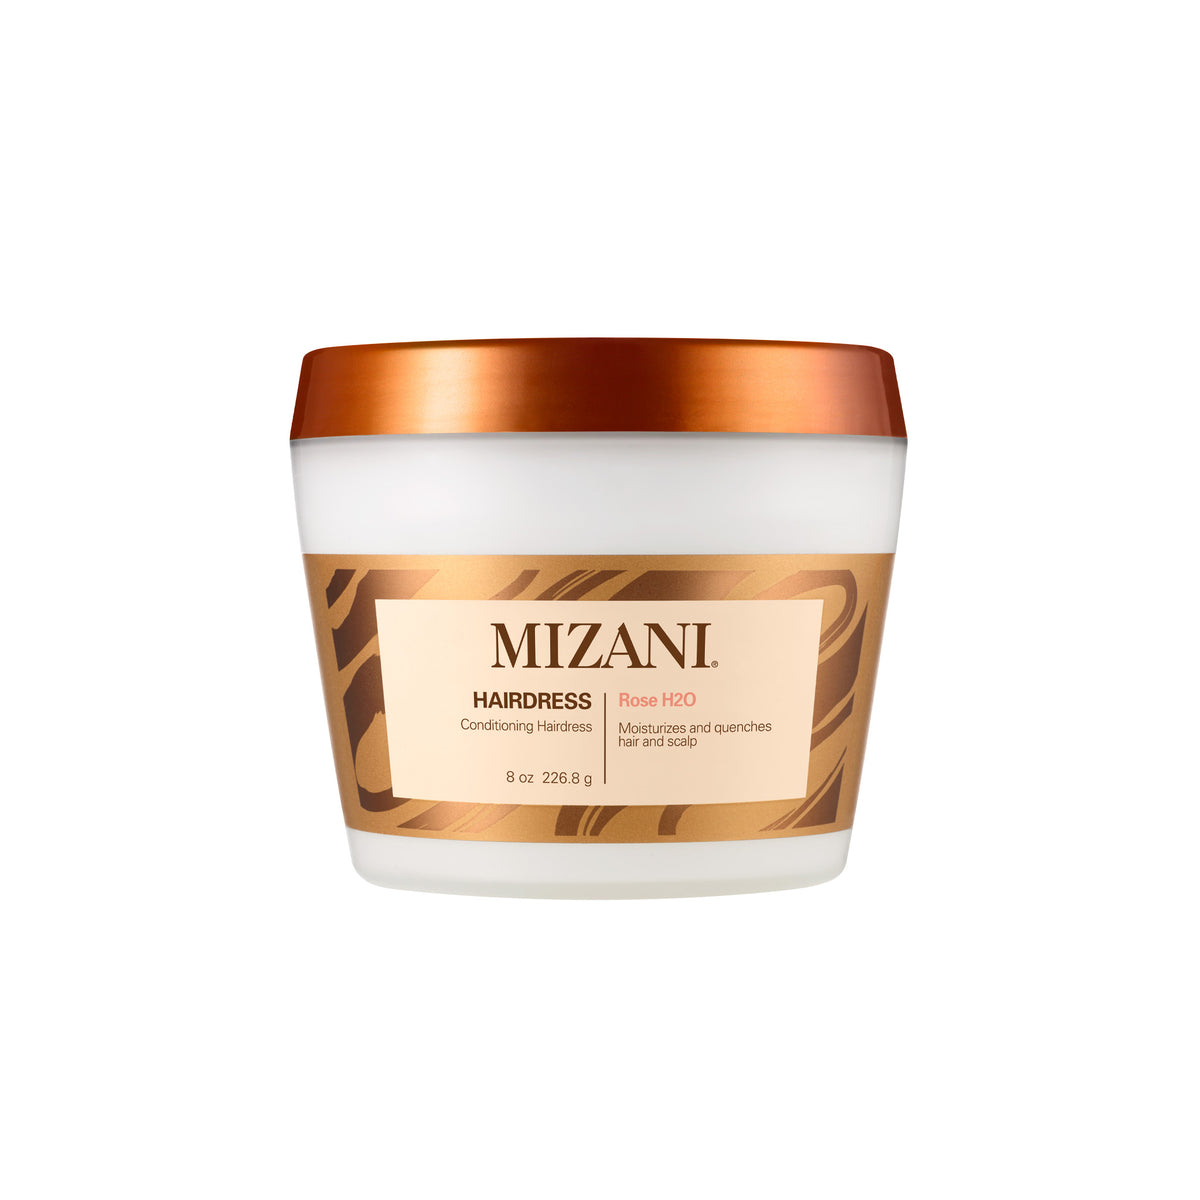 Mizani Rose H20 Hairdress Leave-In Conditioner 236.6g